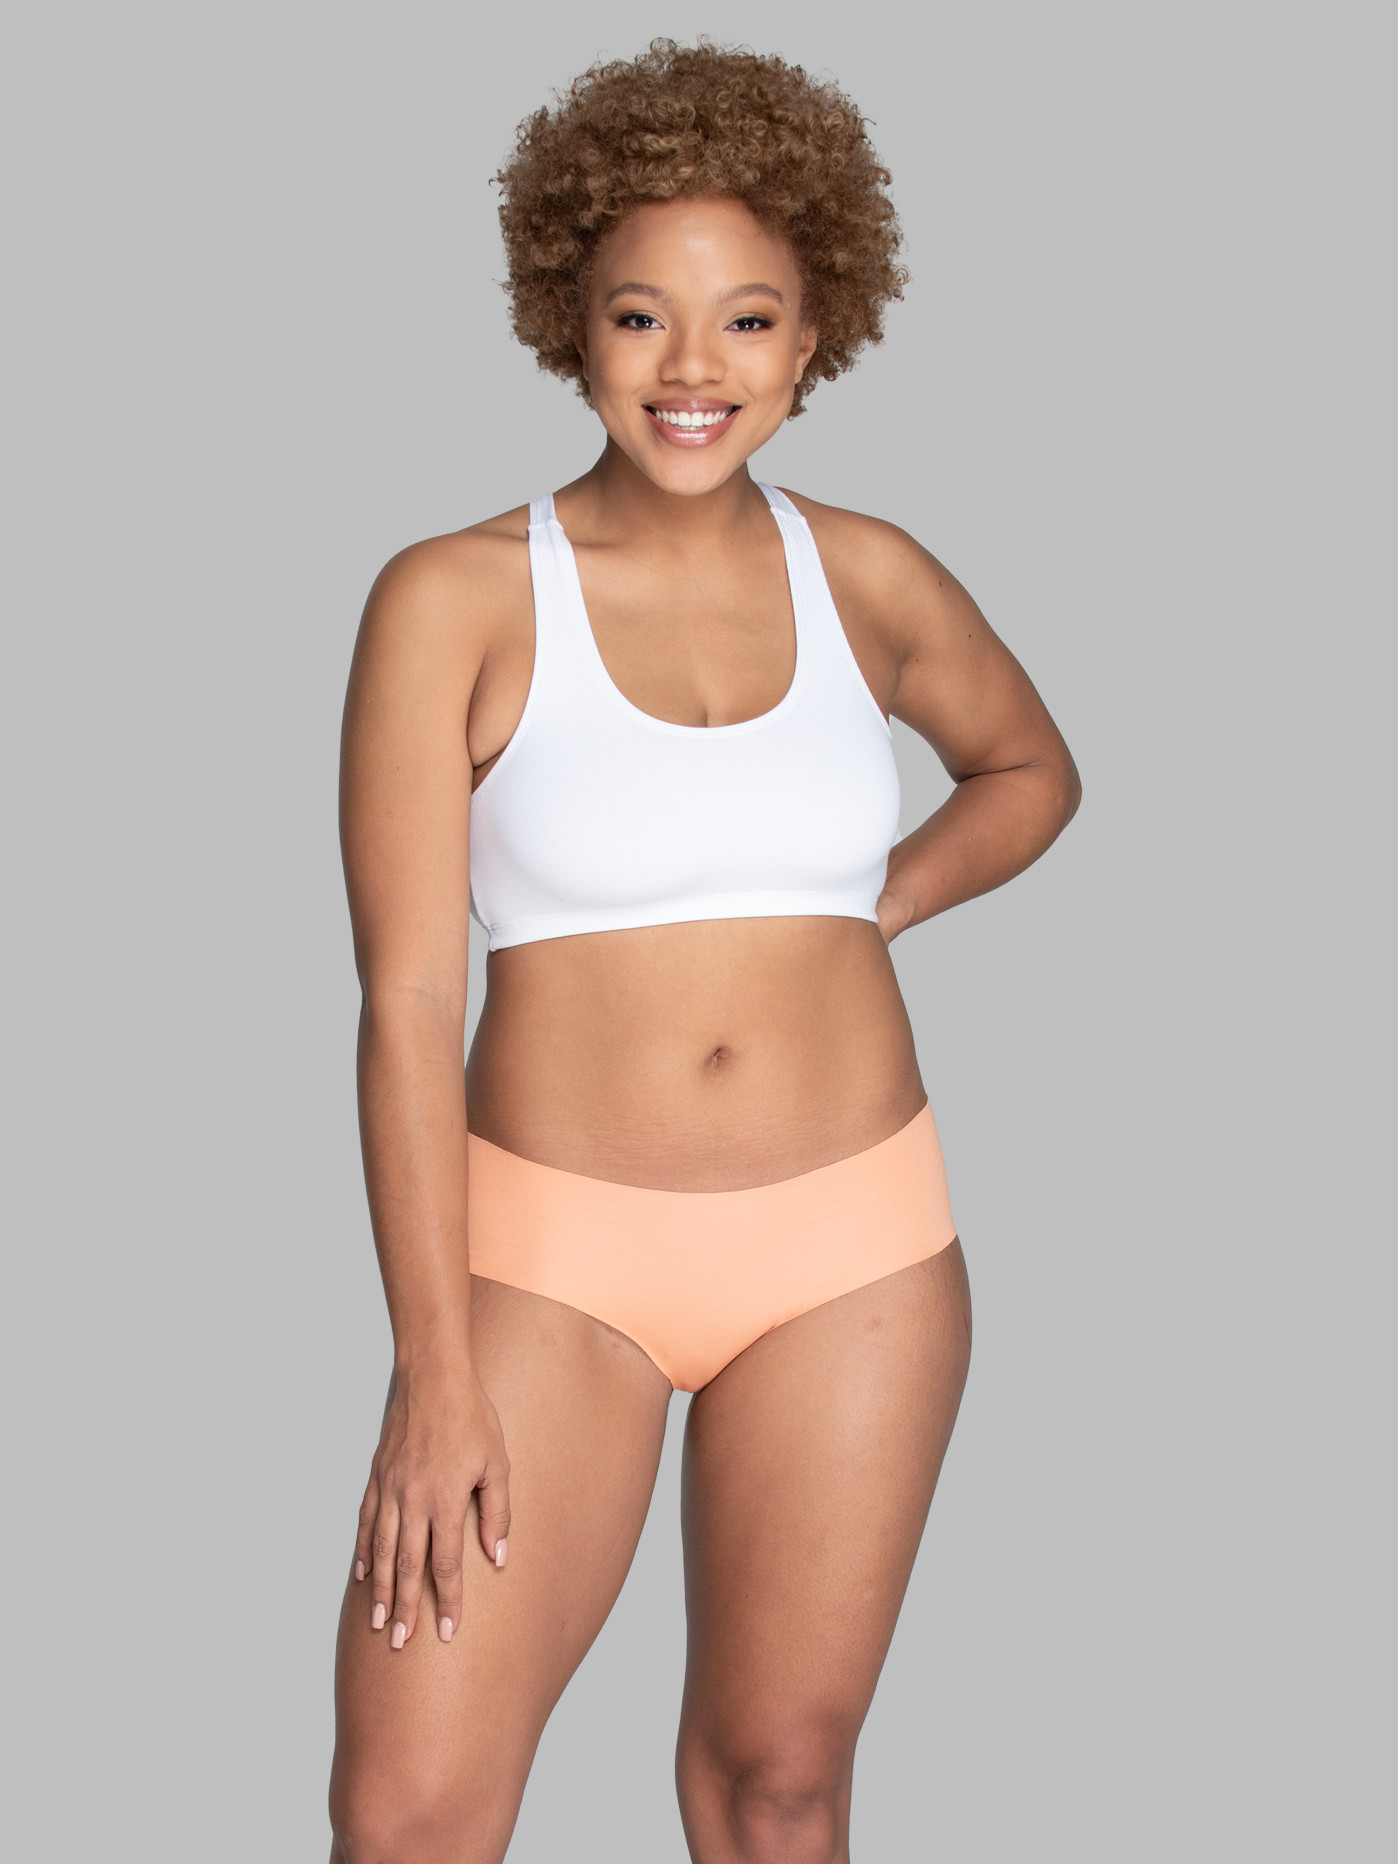 Fruit of the Loom Women's Crafted Comfort Pima Cotton Underwear